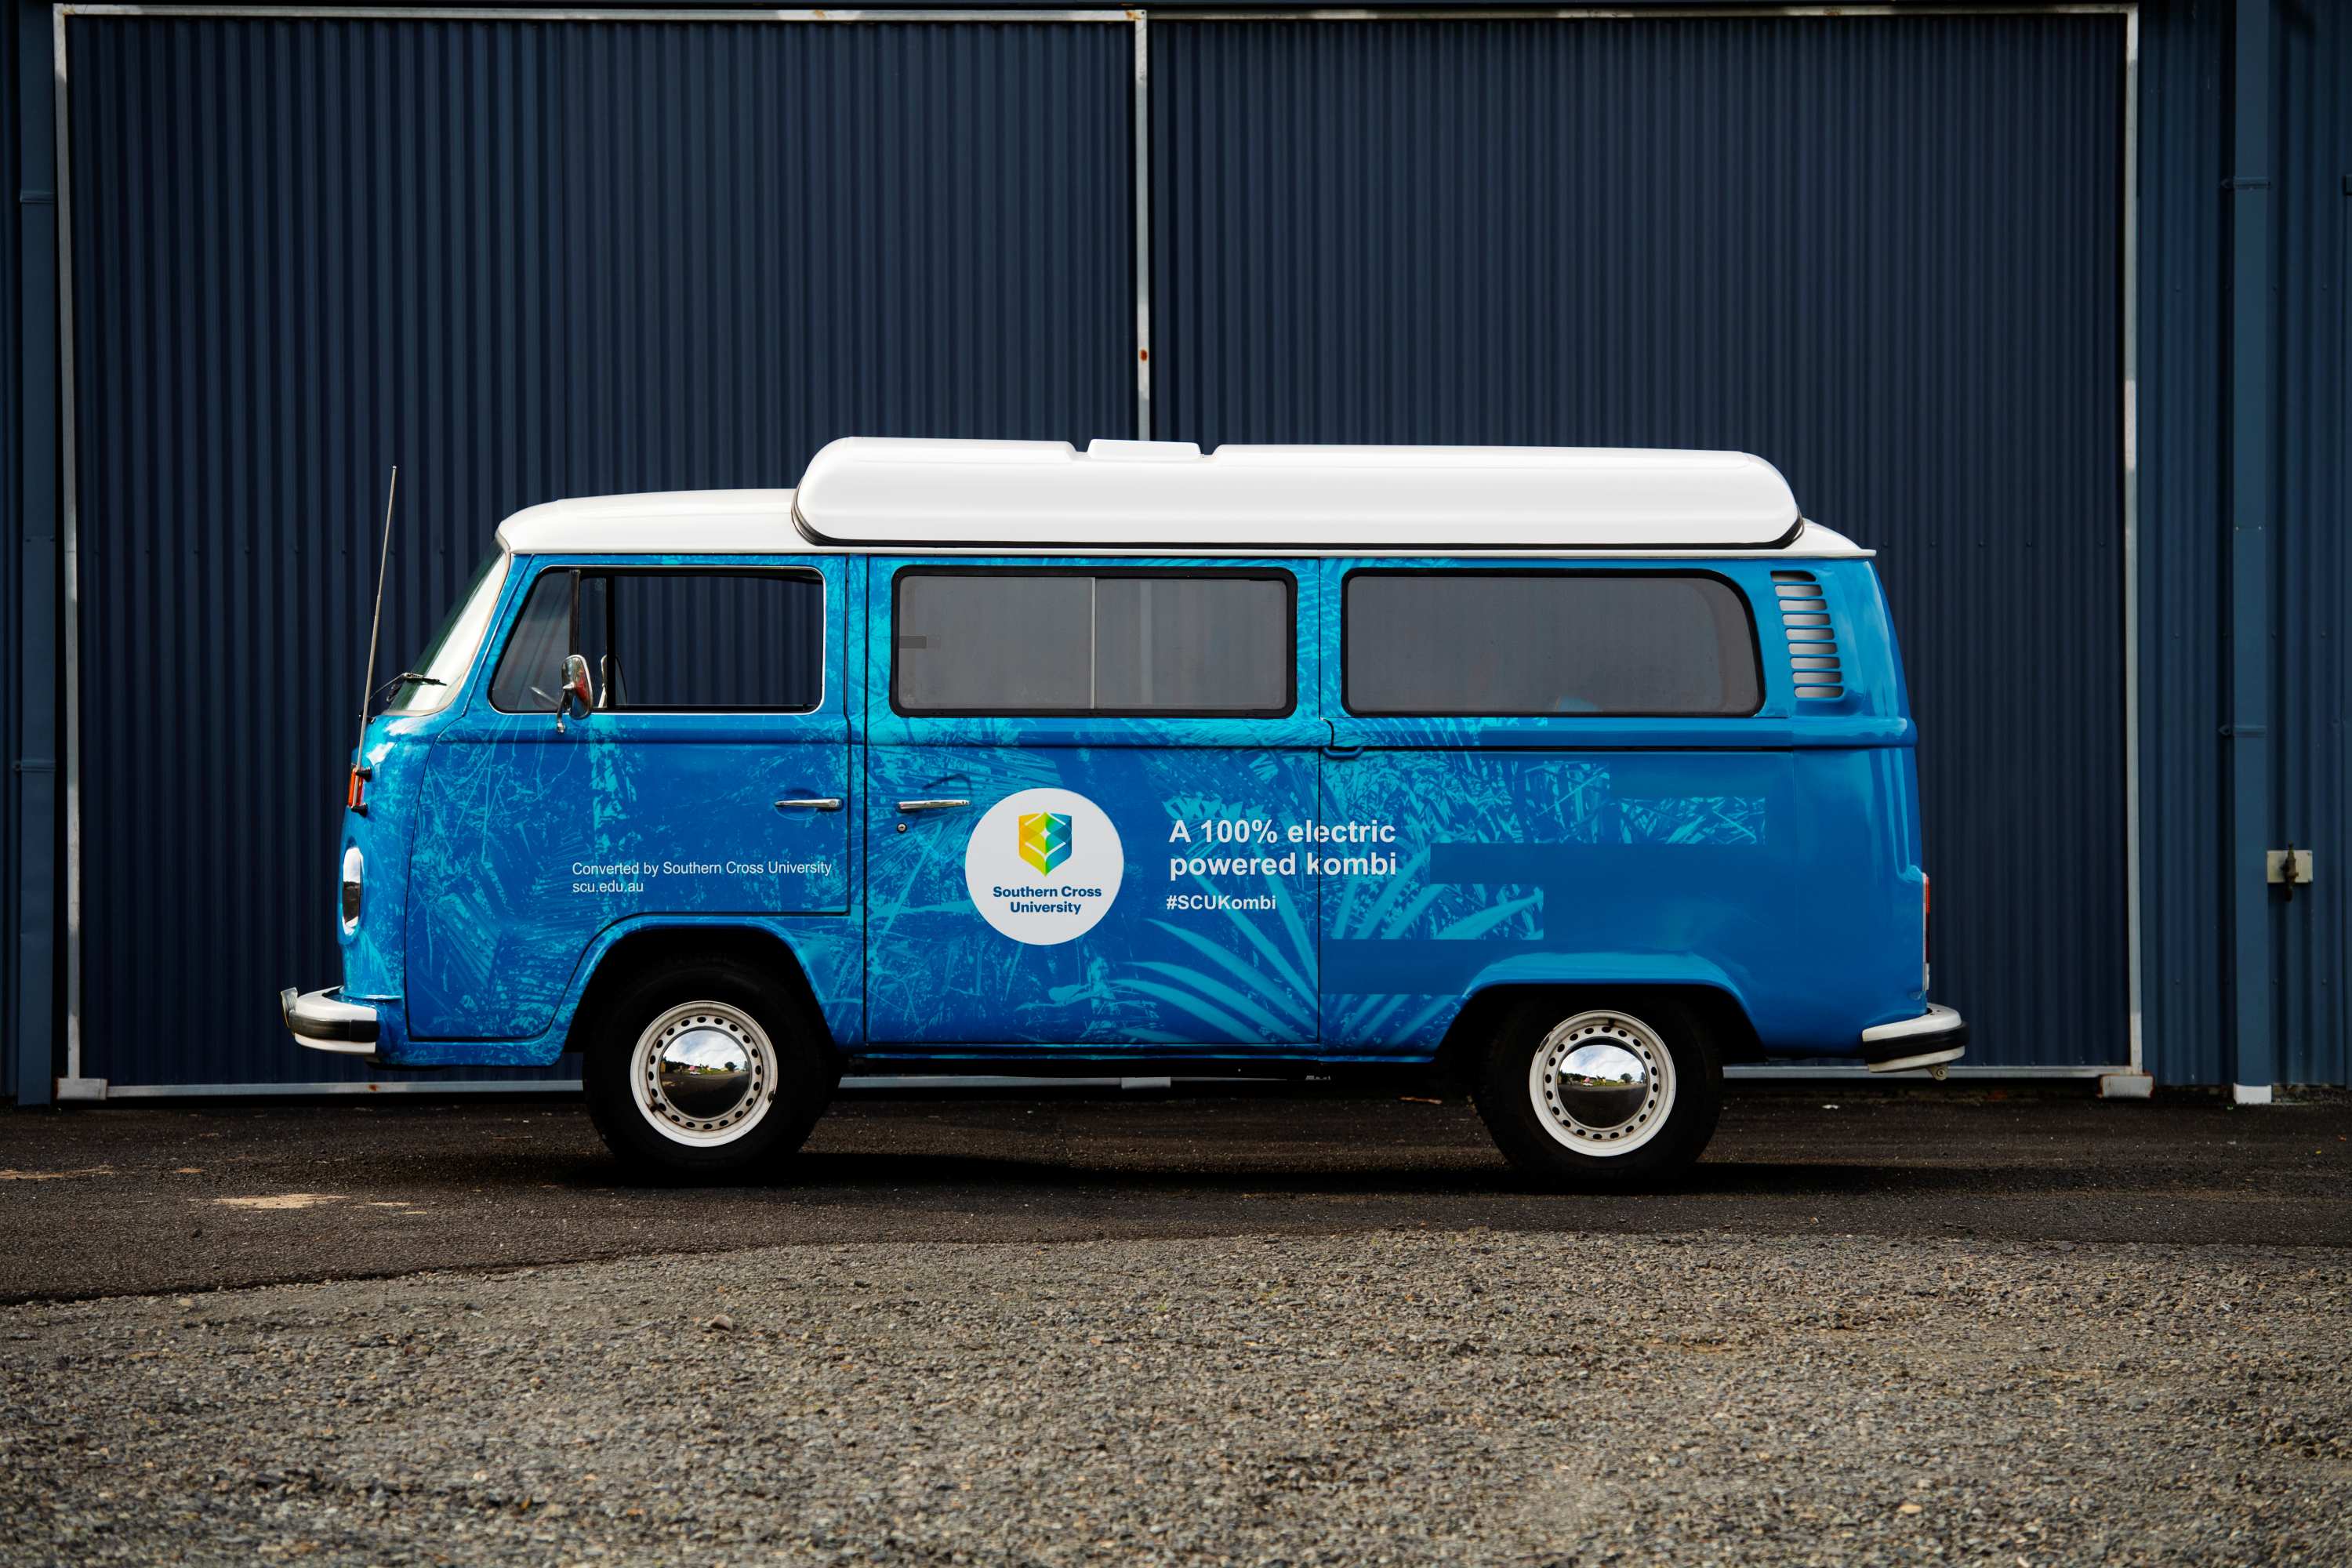 1974 Kombi van converted to electric drives on Lismore campus.